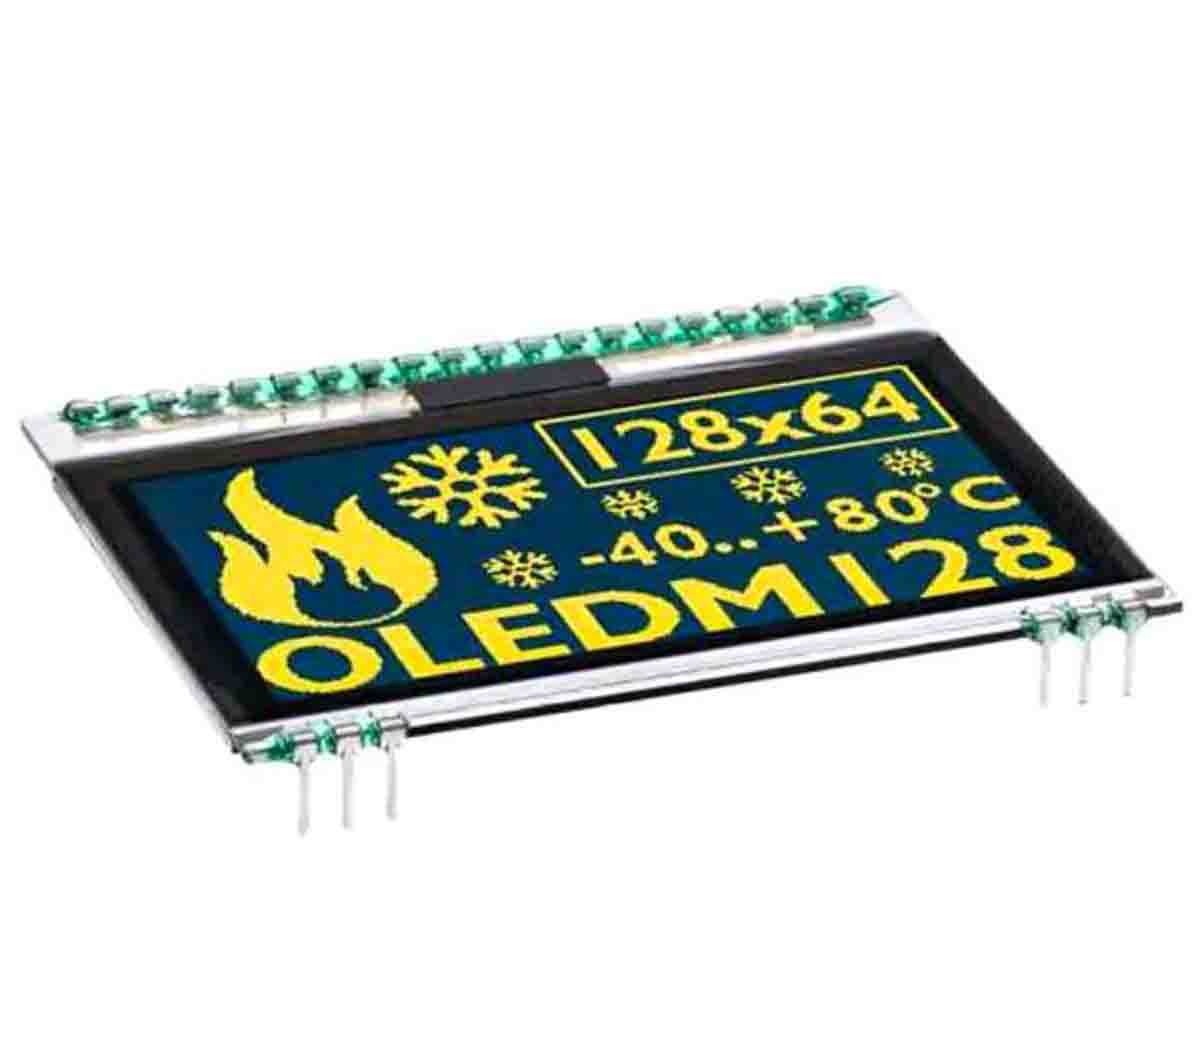 Display Visions 2.3in Yellow OLED Display 128 x 64pixels Graphics I2C, SPI Interface